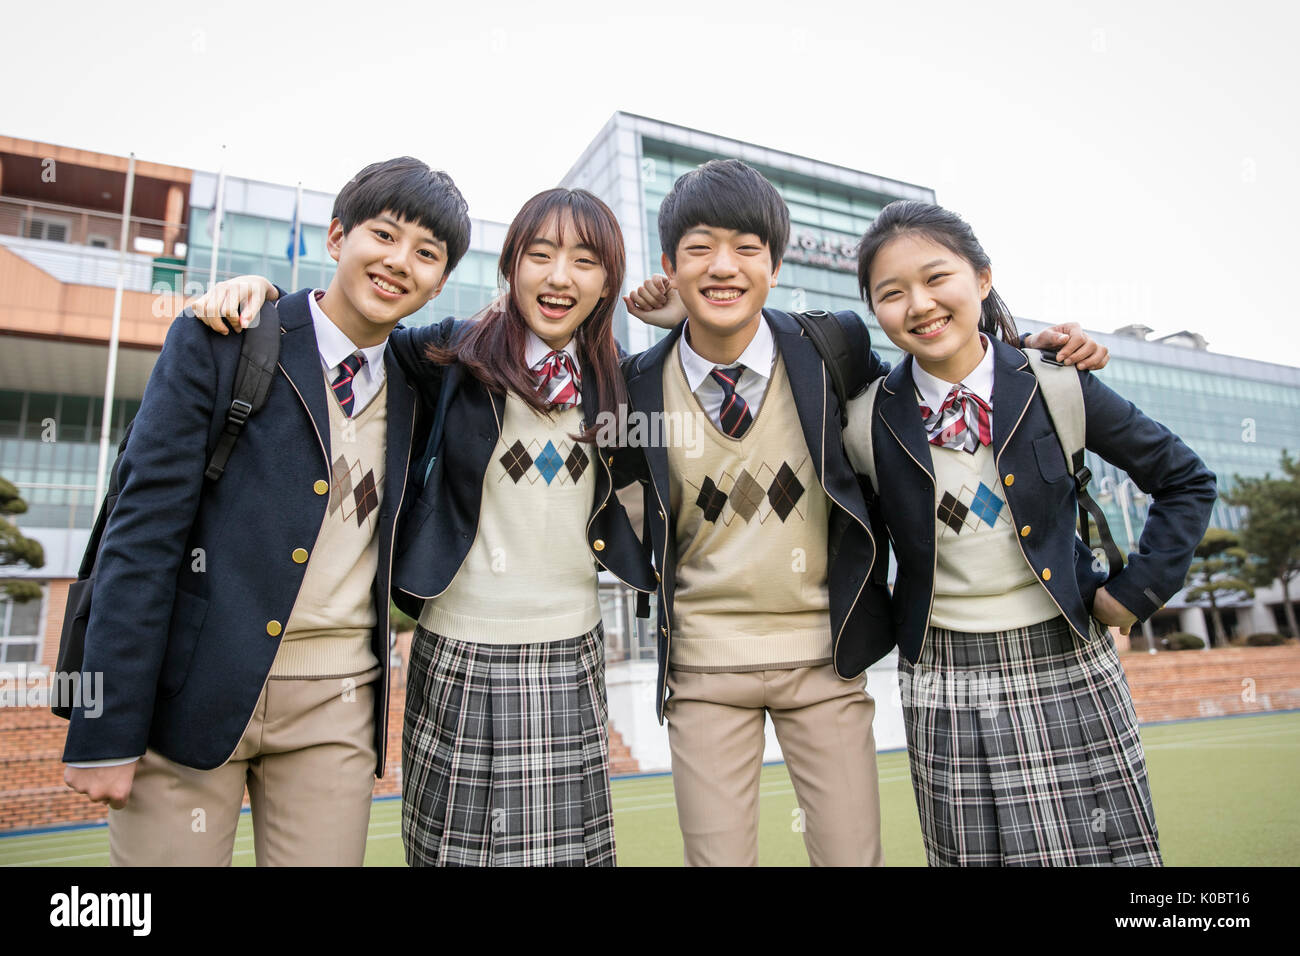 Four smiling school students posing against their school Stock Photo